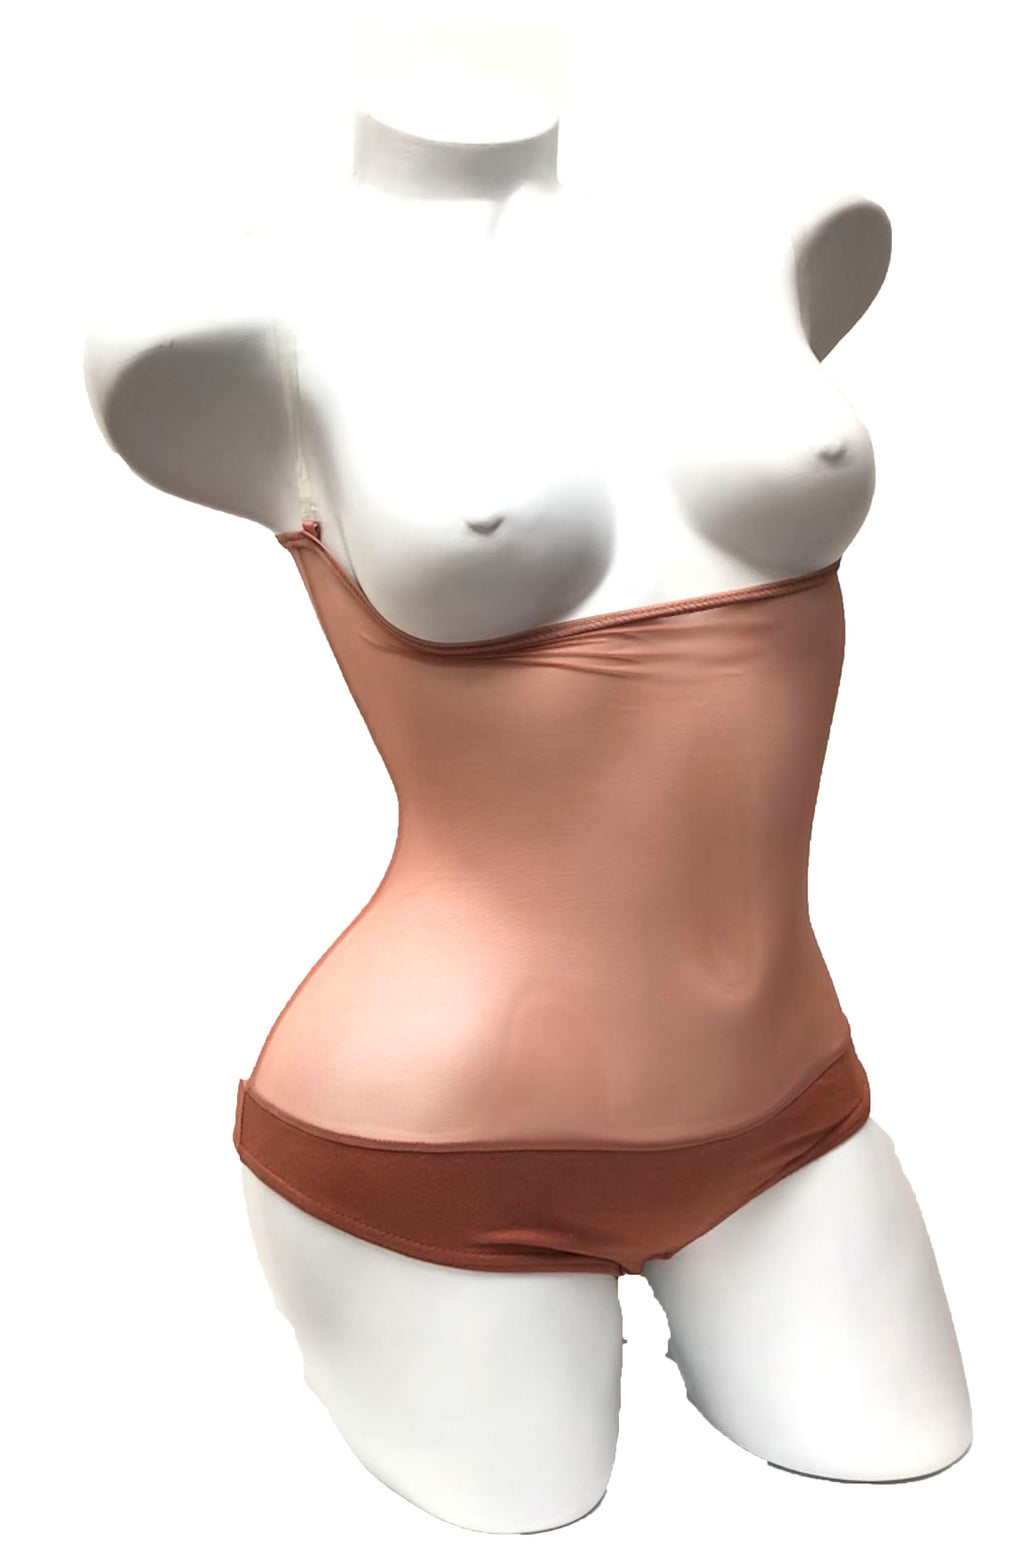 IN STOCK - Underbust with straps - Deep Blush